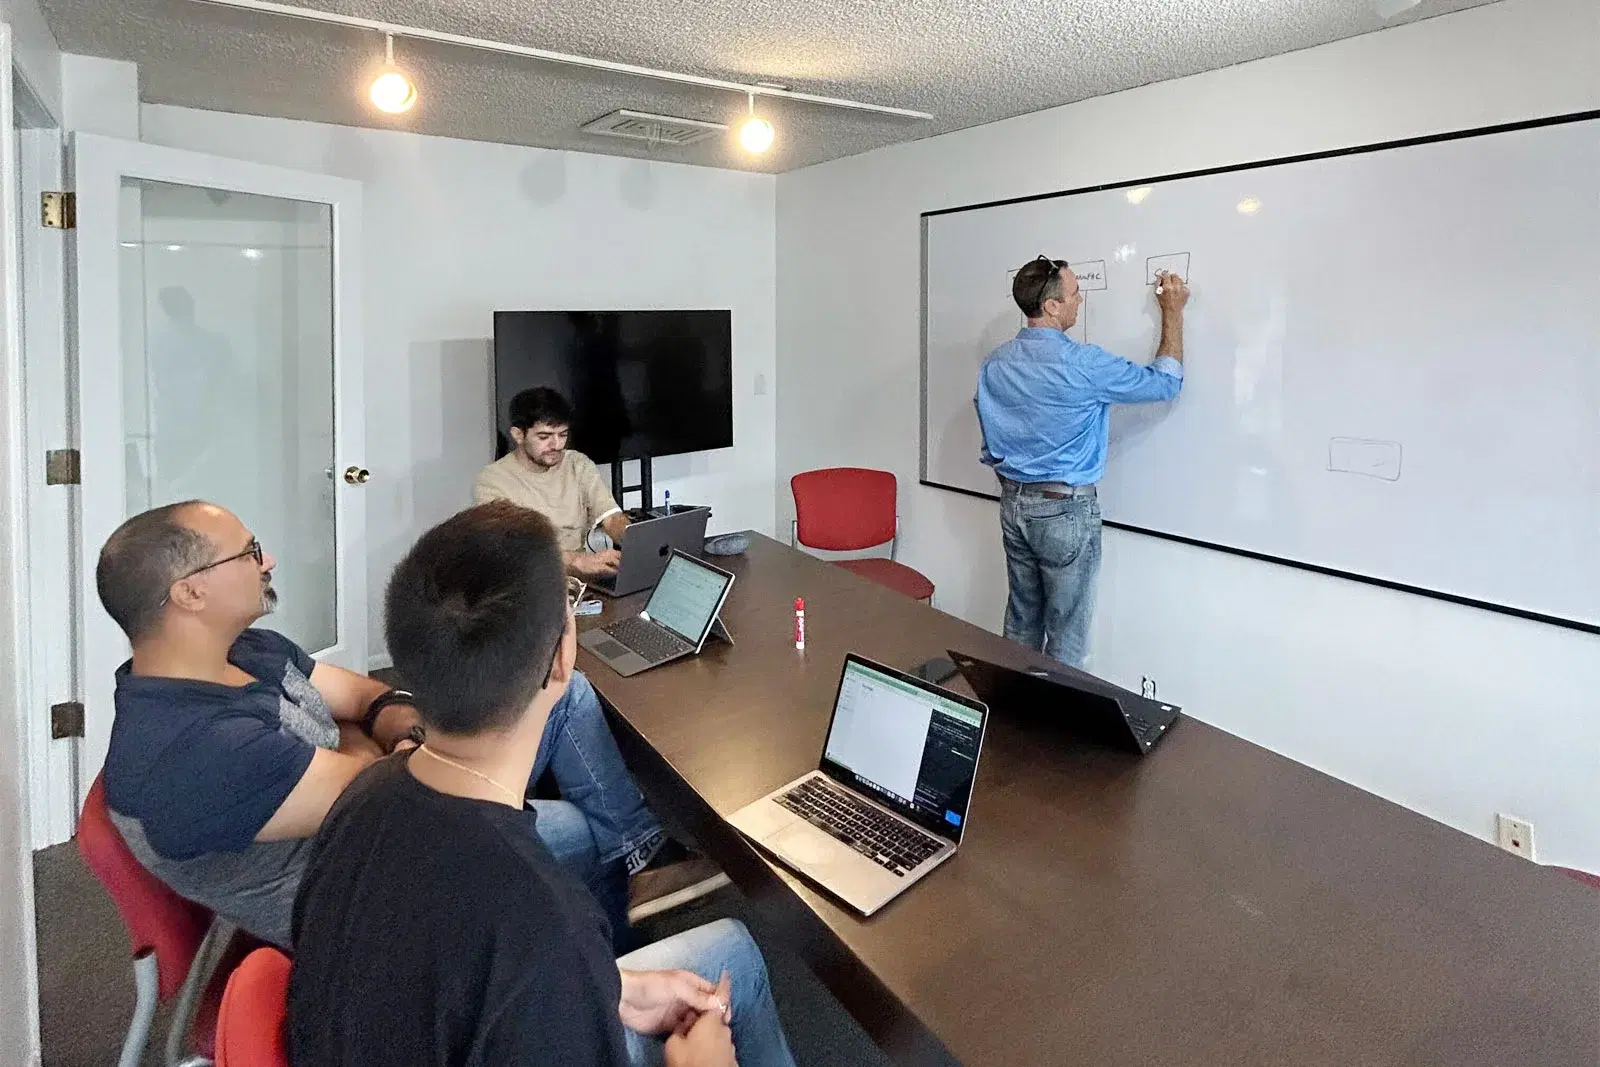 In a problem-solving meeting, one employee writes on a whiteboard while three others sit with laptops, all attentive to the presenter.